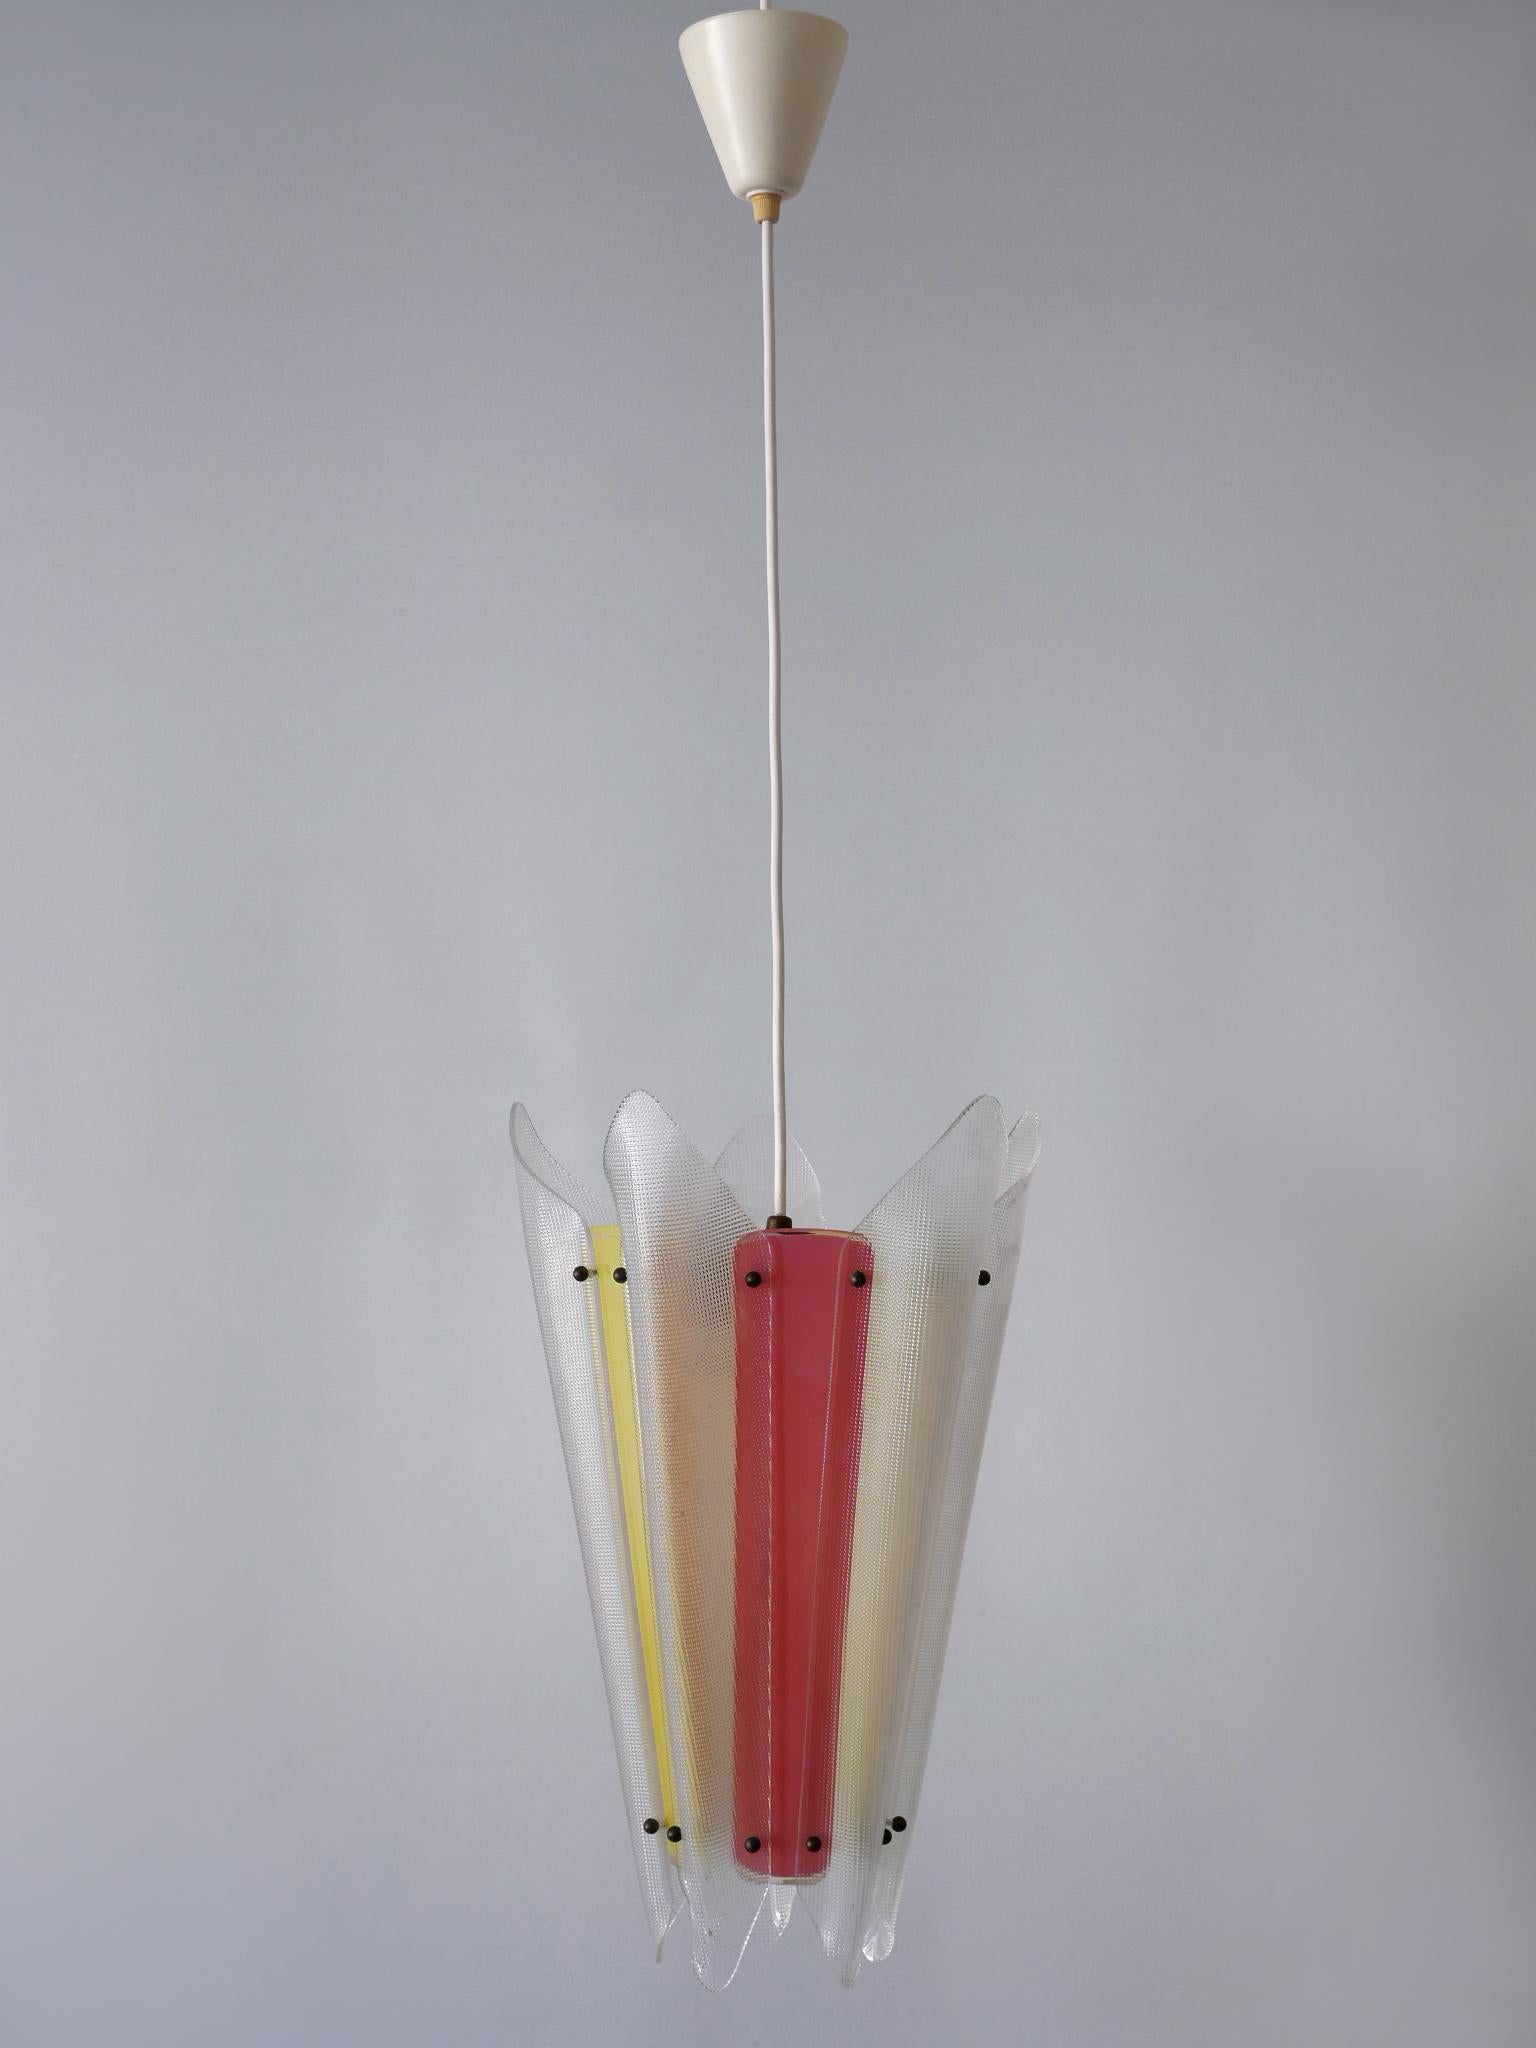 Rare Mid-Century Modern Multi-Colored Lucite Pendant Lamp Germany 1960s For Sale 1